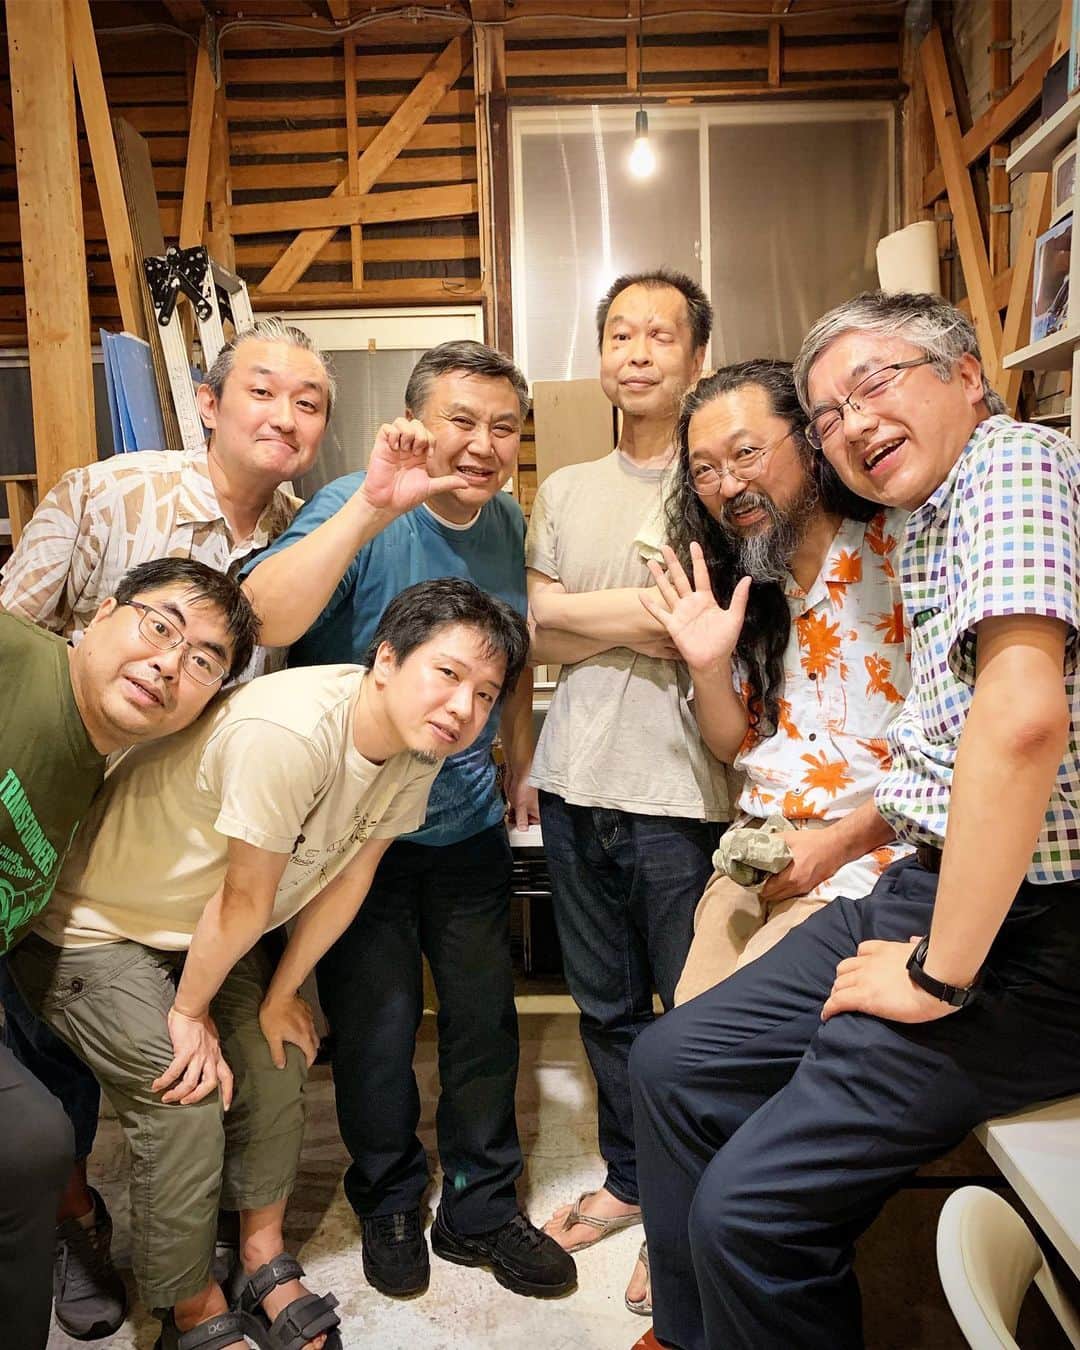 村上隆さんのインスタグラム写真 - (村上隆Instagram)「Today, during the day I was on location shooting my short film near the nuclear power plant in Fukushima and in the early evening I went to a gathering to honor Yasuhiro Wakashima @modelkingdom and Hiroshi Sagae, both otaku sculptors, in their lifetime. Hiroshi Sagae #寒河江弘 unfortunately could not attend due to sudden illness.  The two are both suffering from cancer and the party was planned by Shuichi Miyawaki @sennmusann , the president of Kaiyodo @kaiyodo_pr , in order to encourage them while they are still well.  Mr. Wakashima developed cancer in the ocular fundus in the skull five years ago and, after its removal, was long battling for recovery. A few months ago, I heard, he had a contusion on the skull supporting the brain and had a surgery to secure the brain with titanium and a muscle from his thigh. I couldn’t begin to wrap my head around all this but he seemed very much recovered and well today, leaving me in awe of modern medicine.  I had the pleasure of working with them both: Mr. Wakashima had made my life-size figure sculpture, SMPKo2, and Mr. Sagae had created models for some of my 500 Arhats figures.  It’s rough to see us first-generation otaku age and drop right and left. Yet we are the kind of people whose minds are happily filled with otaku worldview even as we fall to illness, so there’s something tremendous about that. Mr. Wakashima, Mr. Sagae, please do take care and live long.  本日は昼間は福島の原発界隈でムービーの撮影をして、夕方は、オタクの造形師、若島廉弘 AKA 東海村源八さん @modelkingdom さん、寒河江弘さんらお二人を存命中に讃える会に参加しました。寒河江弘さんは急遽具合が悪くなって不参加との事。 お二人とも癌を患っており、元気なうちに皆んなで元気付けようと、海洋堂 @kaiyodo_pr の社長、宮脇修一 @sennmusann さんが企画したパーティでした。 若島さんは5年前、頭蓋骨の眼底に癌が出来て、その摘出、闘病で、苦しんでおられましたが、数ヶ月前に、脳を支える頭蓋骨が座礁し、チタンと足の太ももの腱で、脳を支える手術をしたとの事で、聞いてても手術の内容がわからなかったのですが、とても元気になられていて、現代医学の進歩に驚いていた次第。 その若島さんはSMPKO2という等身大フィギュアを作ってくれて、寒河江さんは五百羅漢を造形してくださったご縁。 オタク第1世代も歳をとり、バタバタと倒れていっており、なかなか辛いものがありますな。しかし、こうして病に倒れても頭の中はオタクの世界観でバラ色という人種！物凄いものがありますな。 若島さん、寒河江さん、養生して、長生きしてください。」7月30日 2時12分 - takashipom